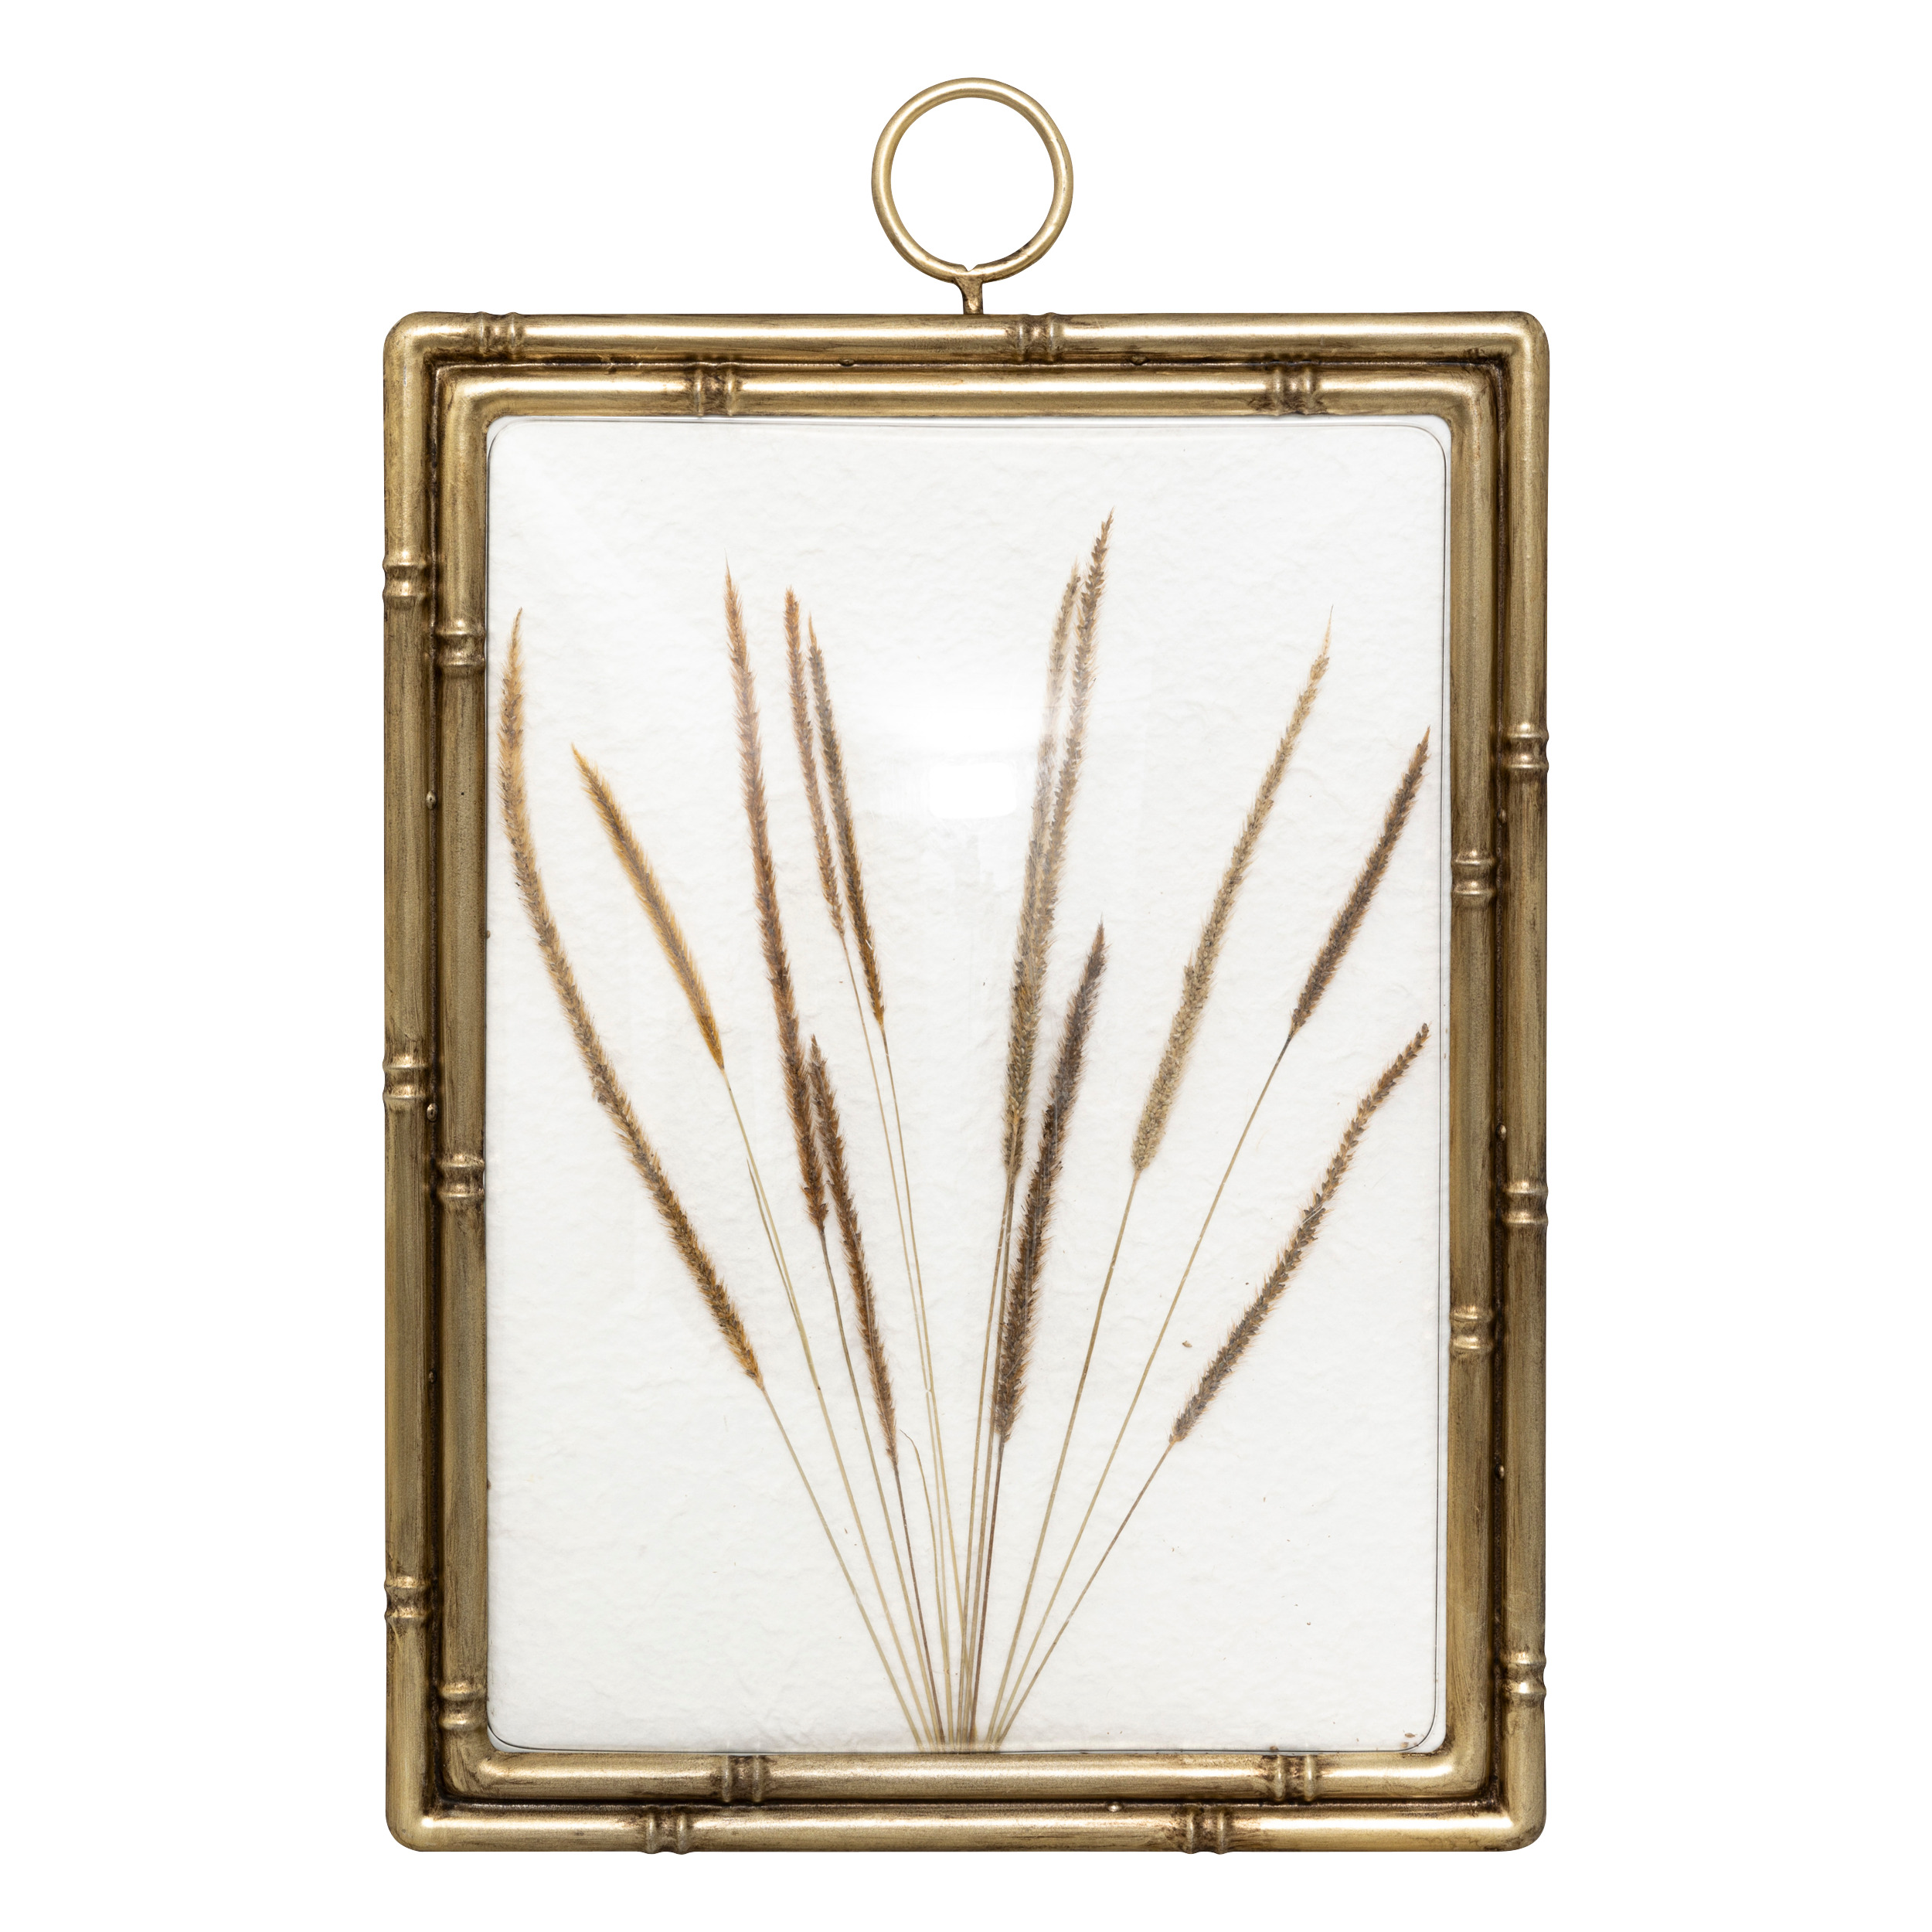 Aw24 Jonas Wall Decoration 30 X 46 Cm With Reeds Gift